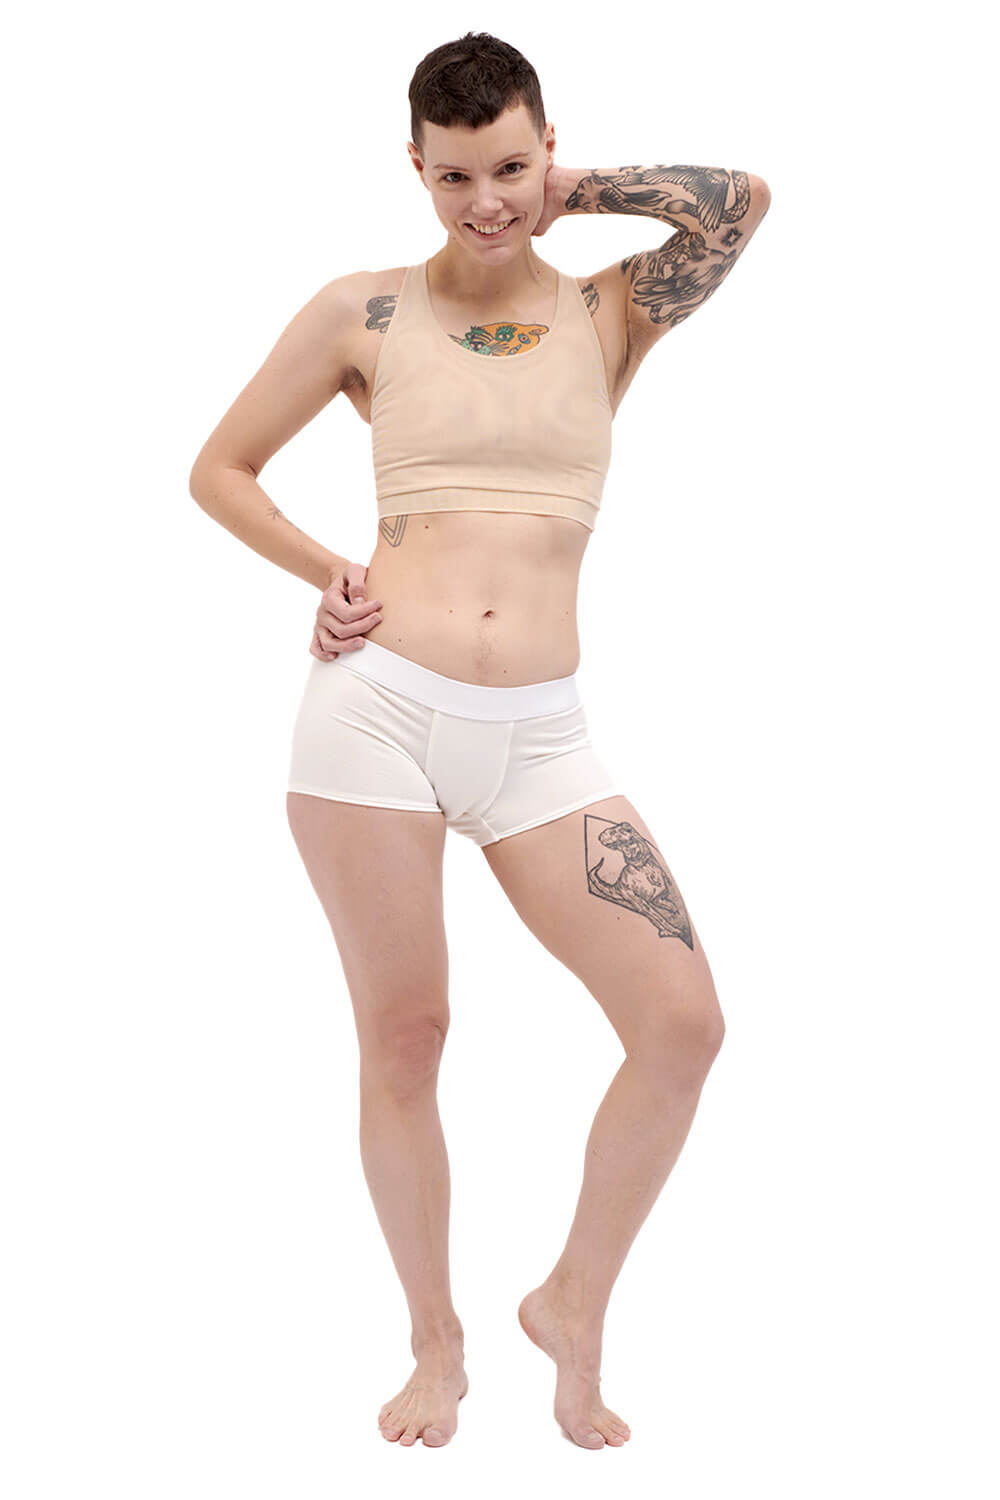 Petite person wearing a nude racerback chest binder made from mesh, photographed from the front with arms up.